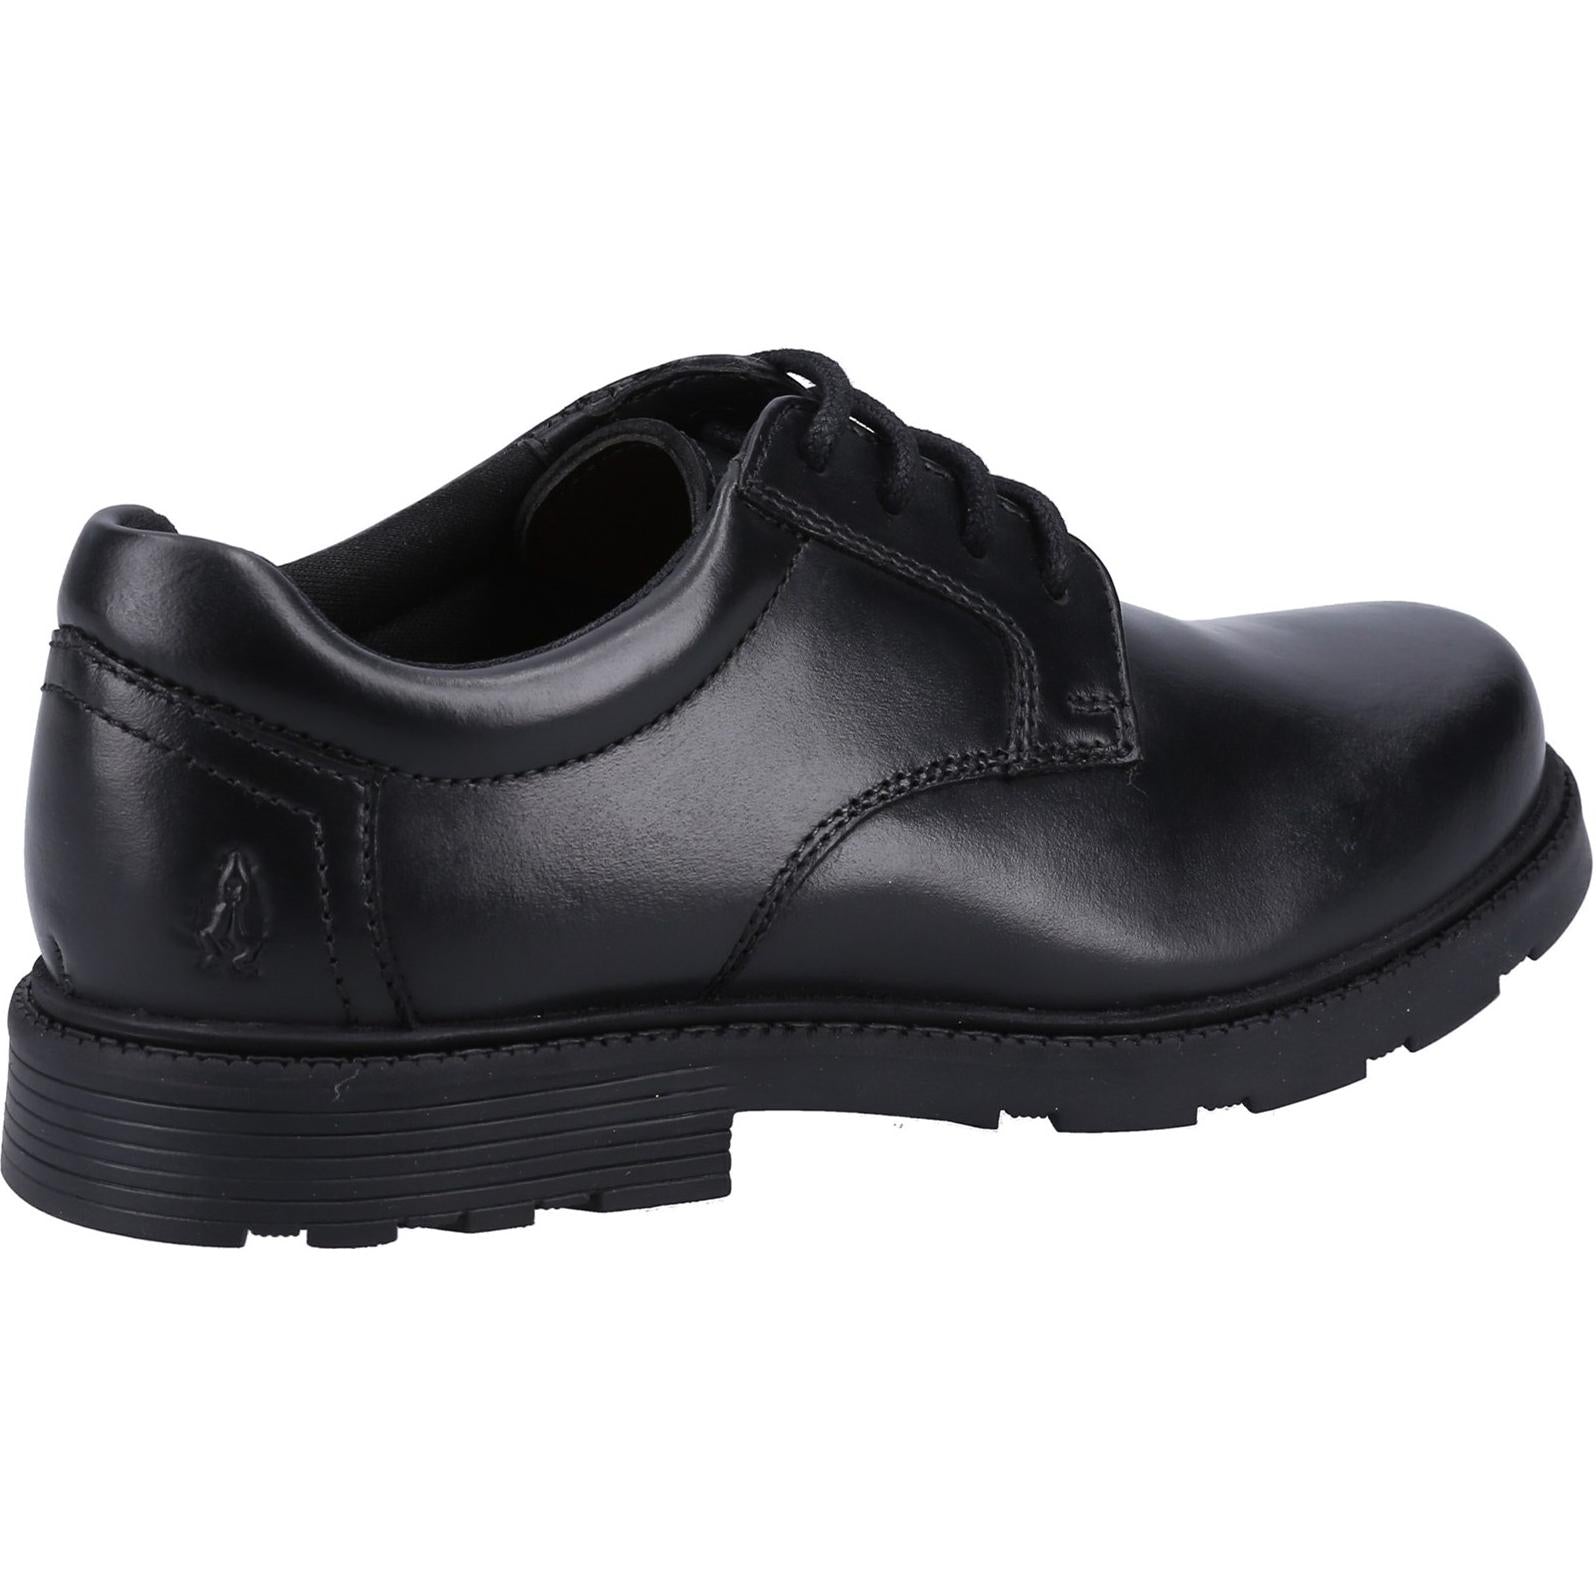 Hush Puppies Oliver SNR Shoe